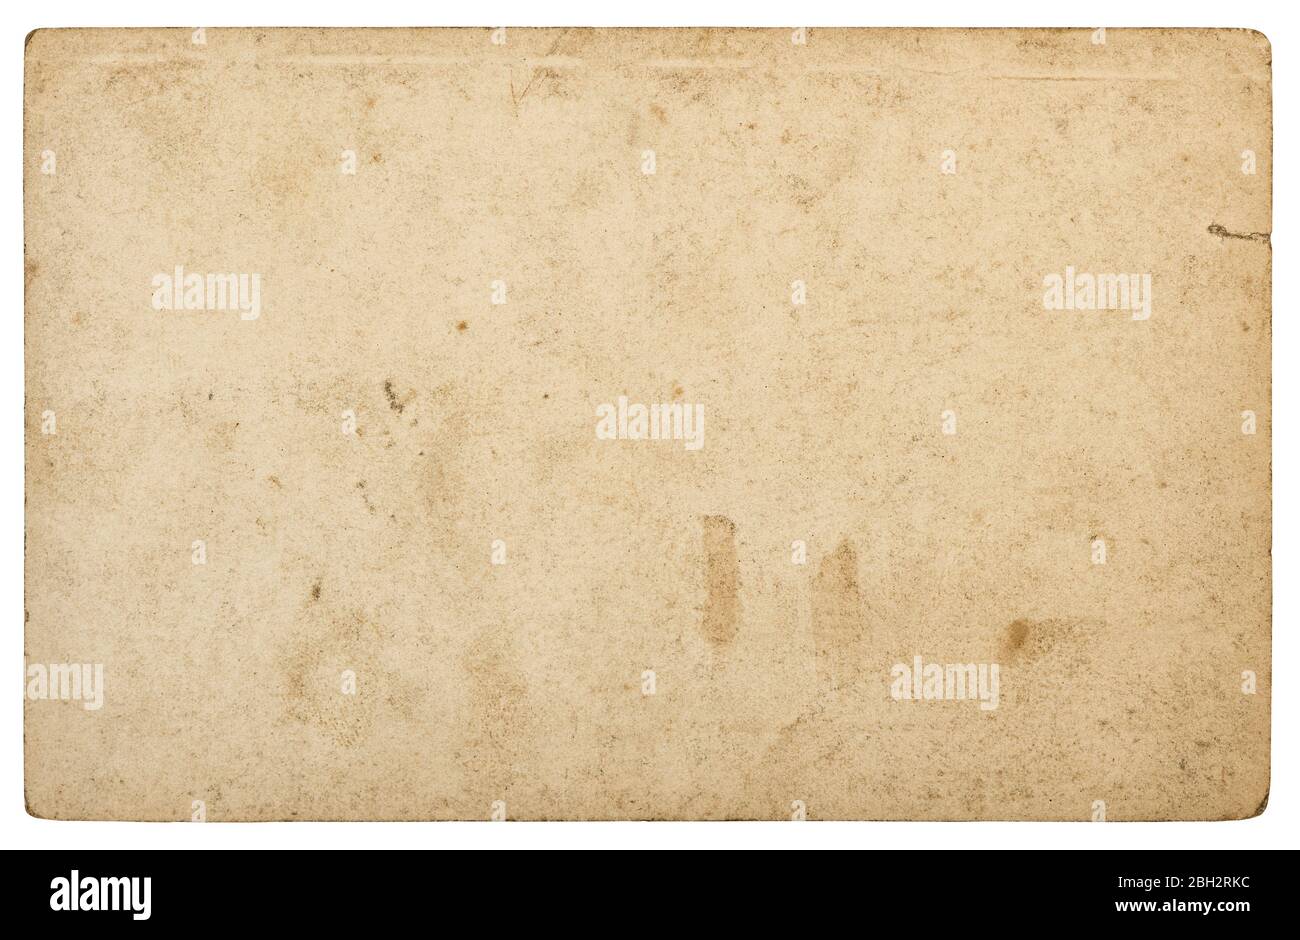 Old Stained Paper Texture Free (Paper)